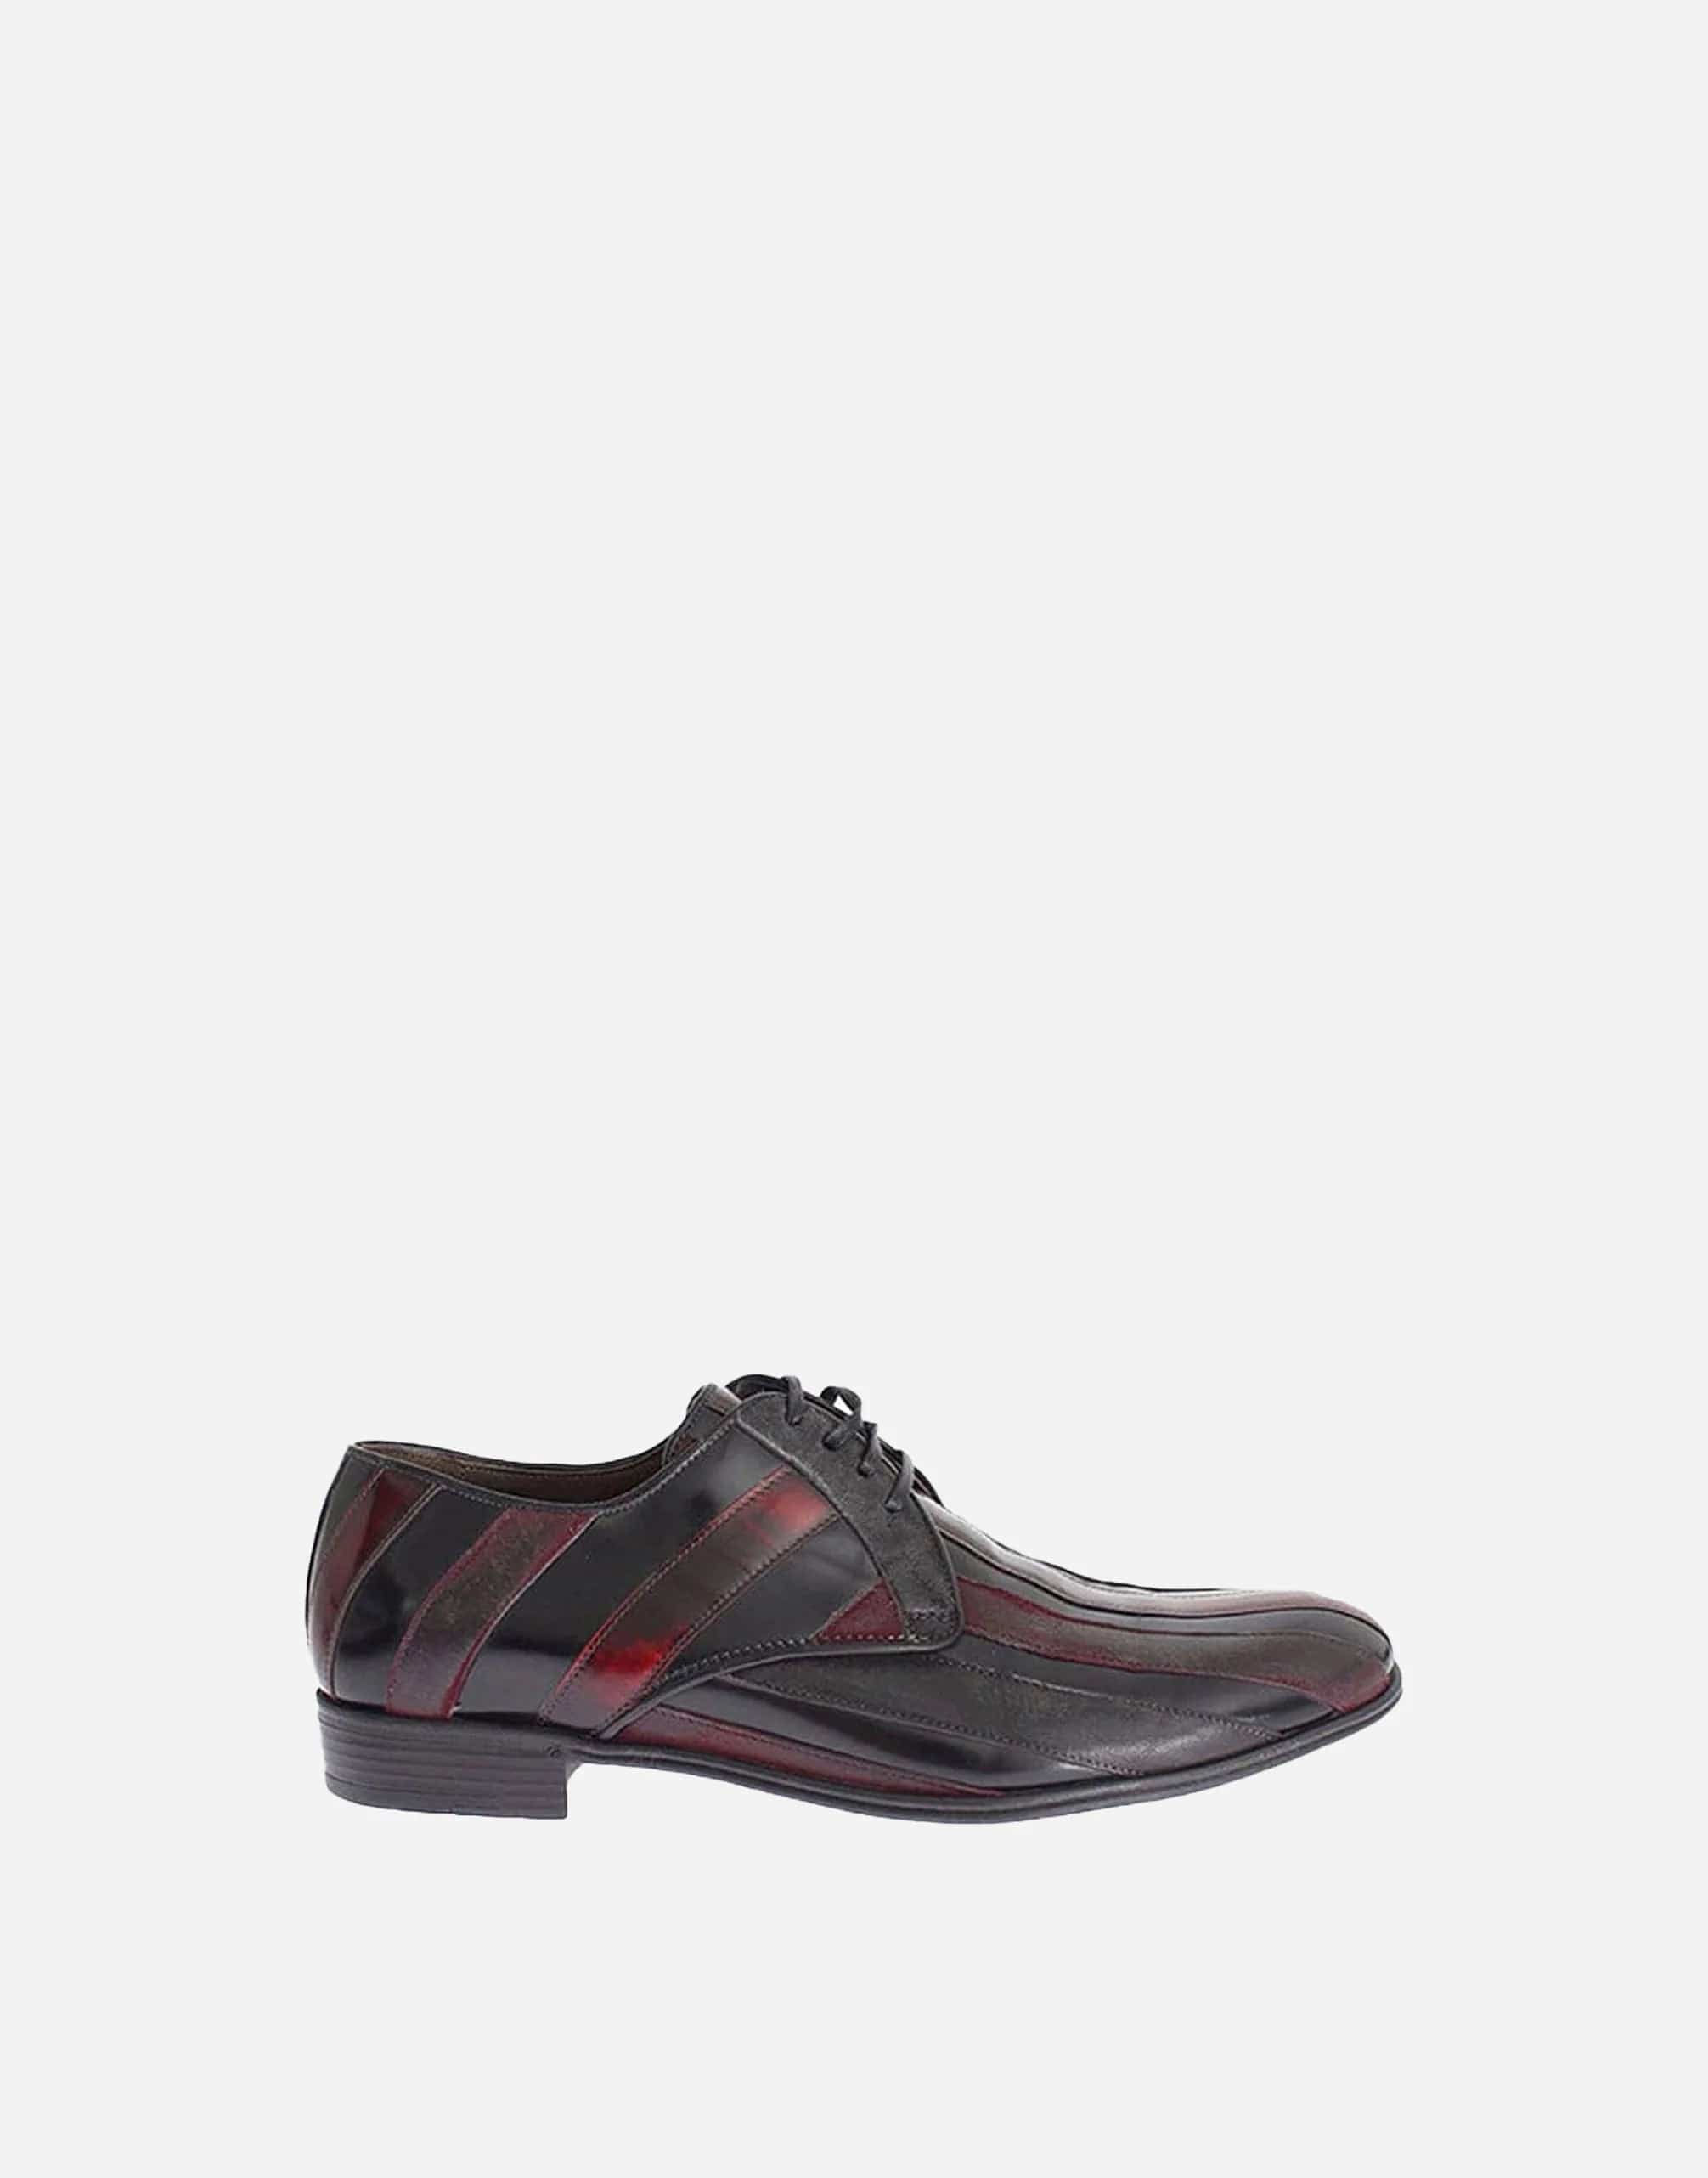 Dolce & Gabbana Striped Leather Formal Shoes